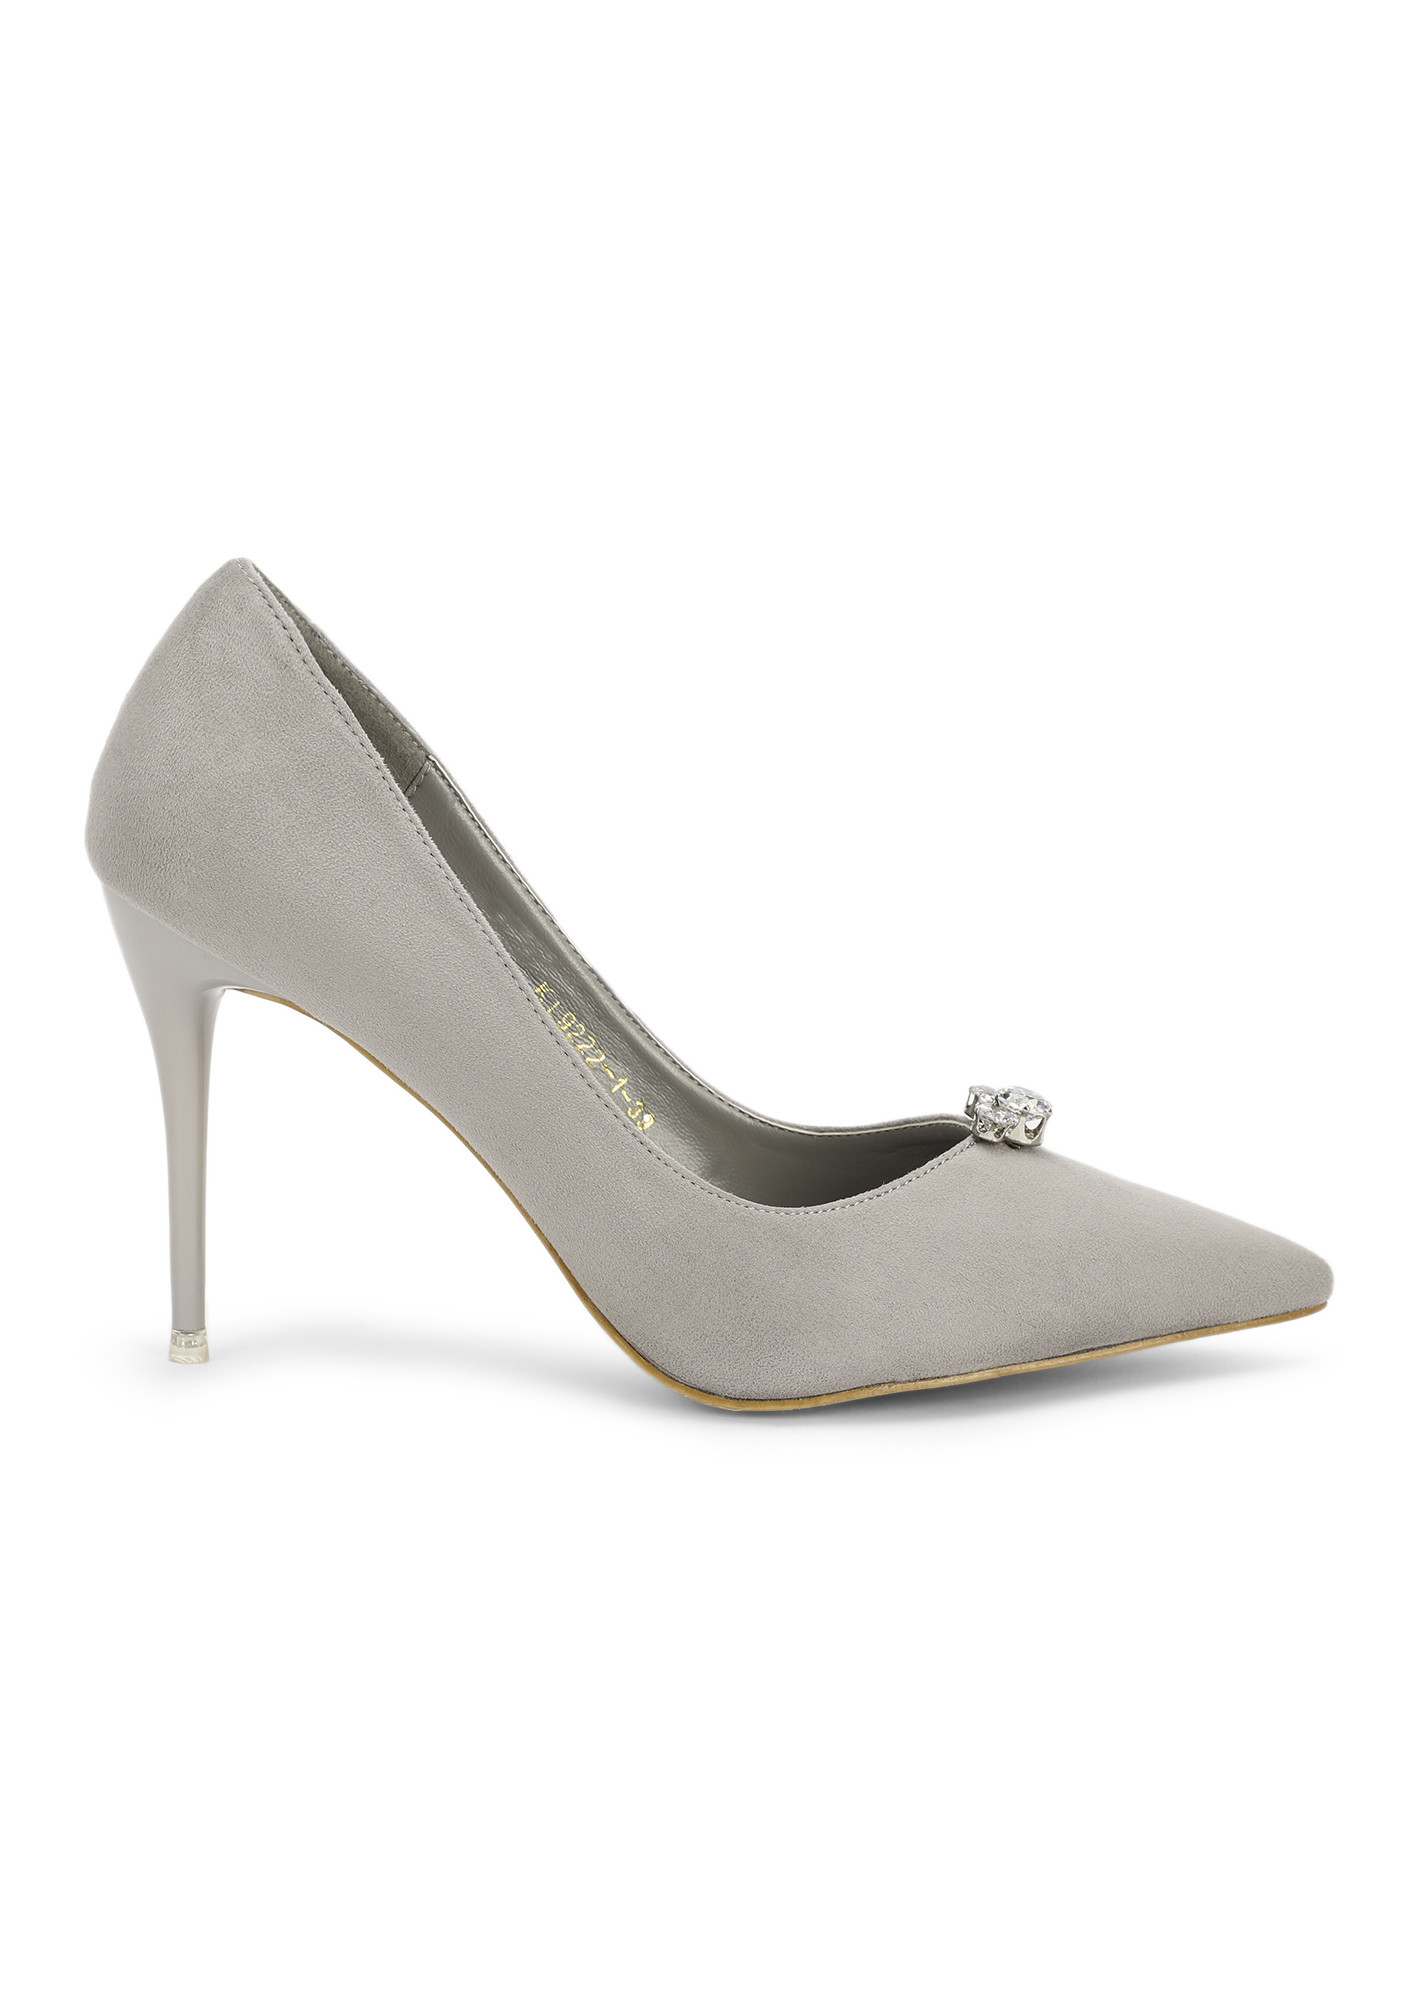 PARTY FAVOR GREY HEELED SHOES